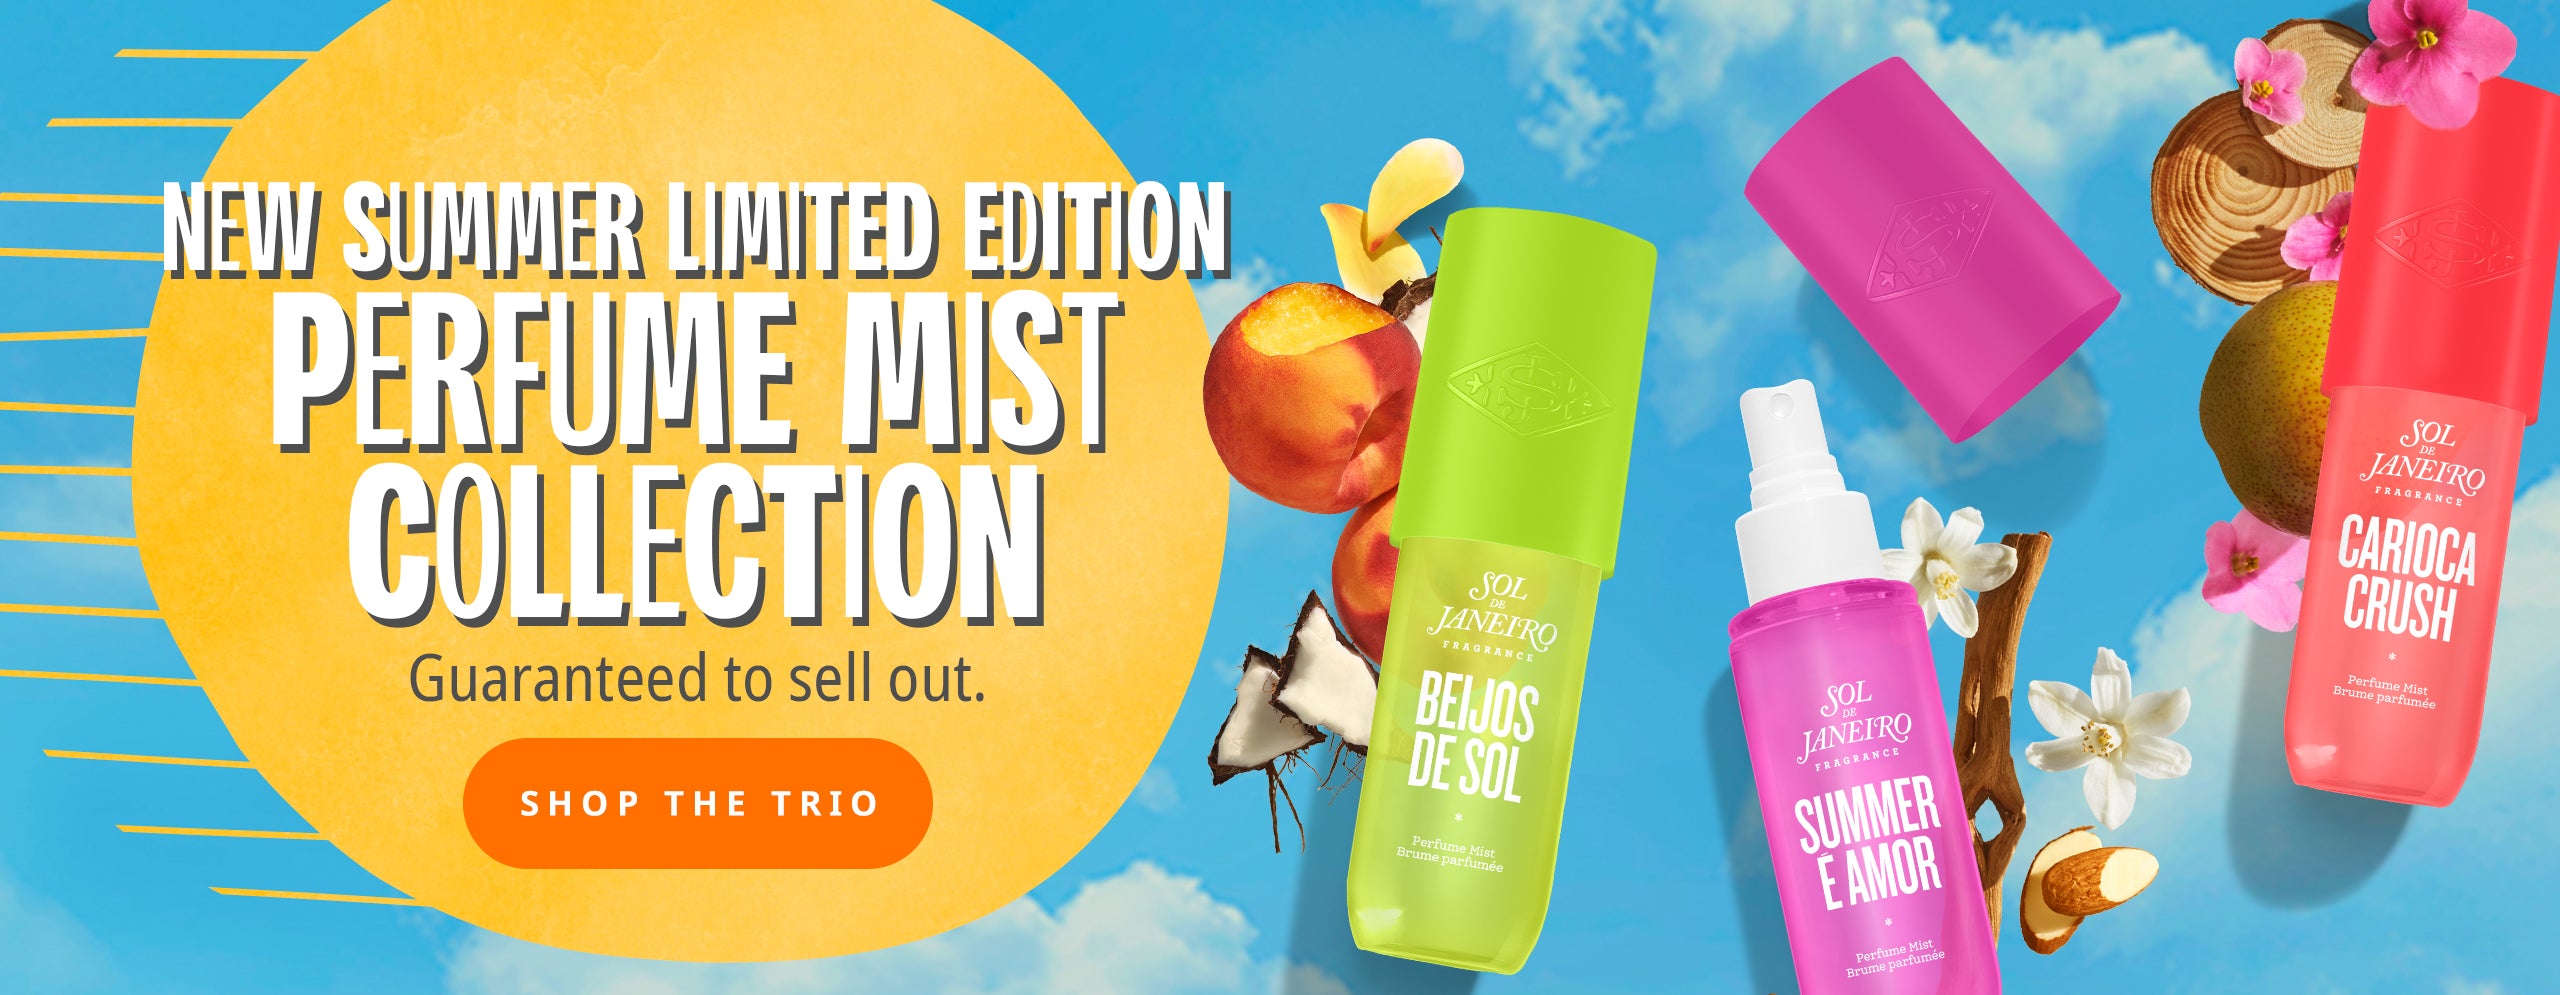 New summer limited edition perfume mist collection. Guaranteed to sell out. Shop the trio!